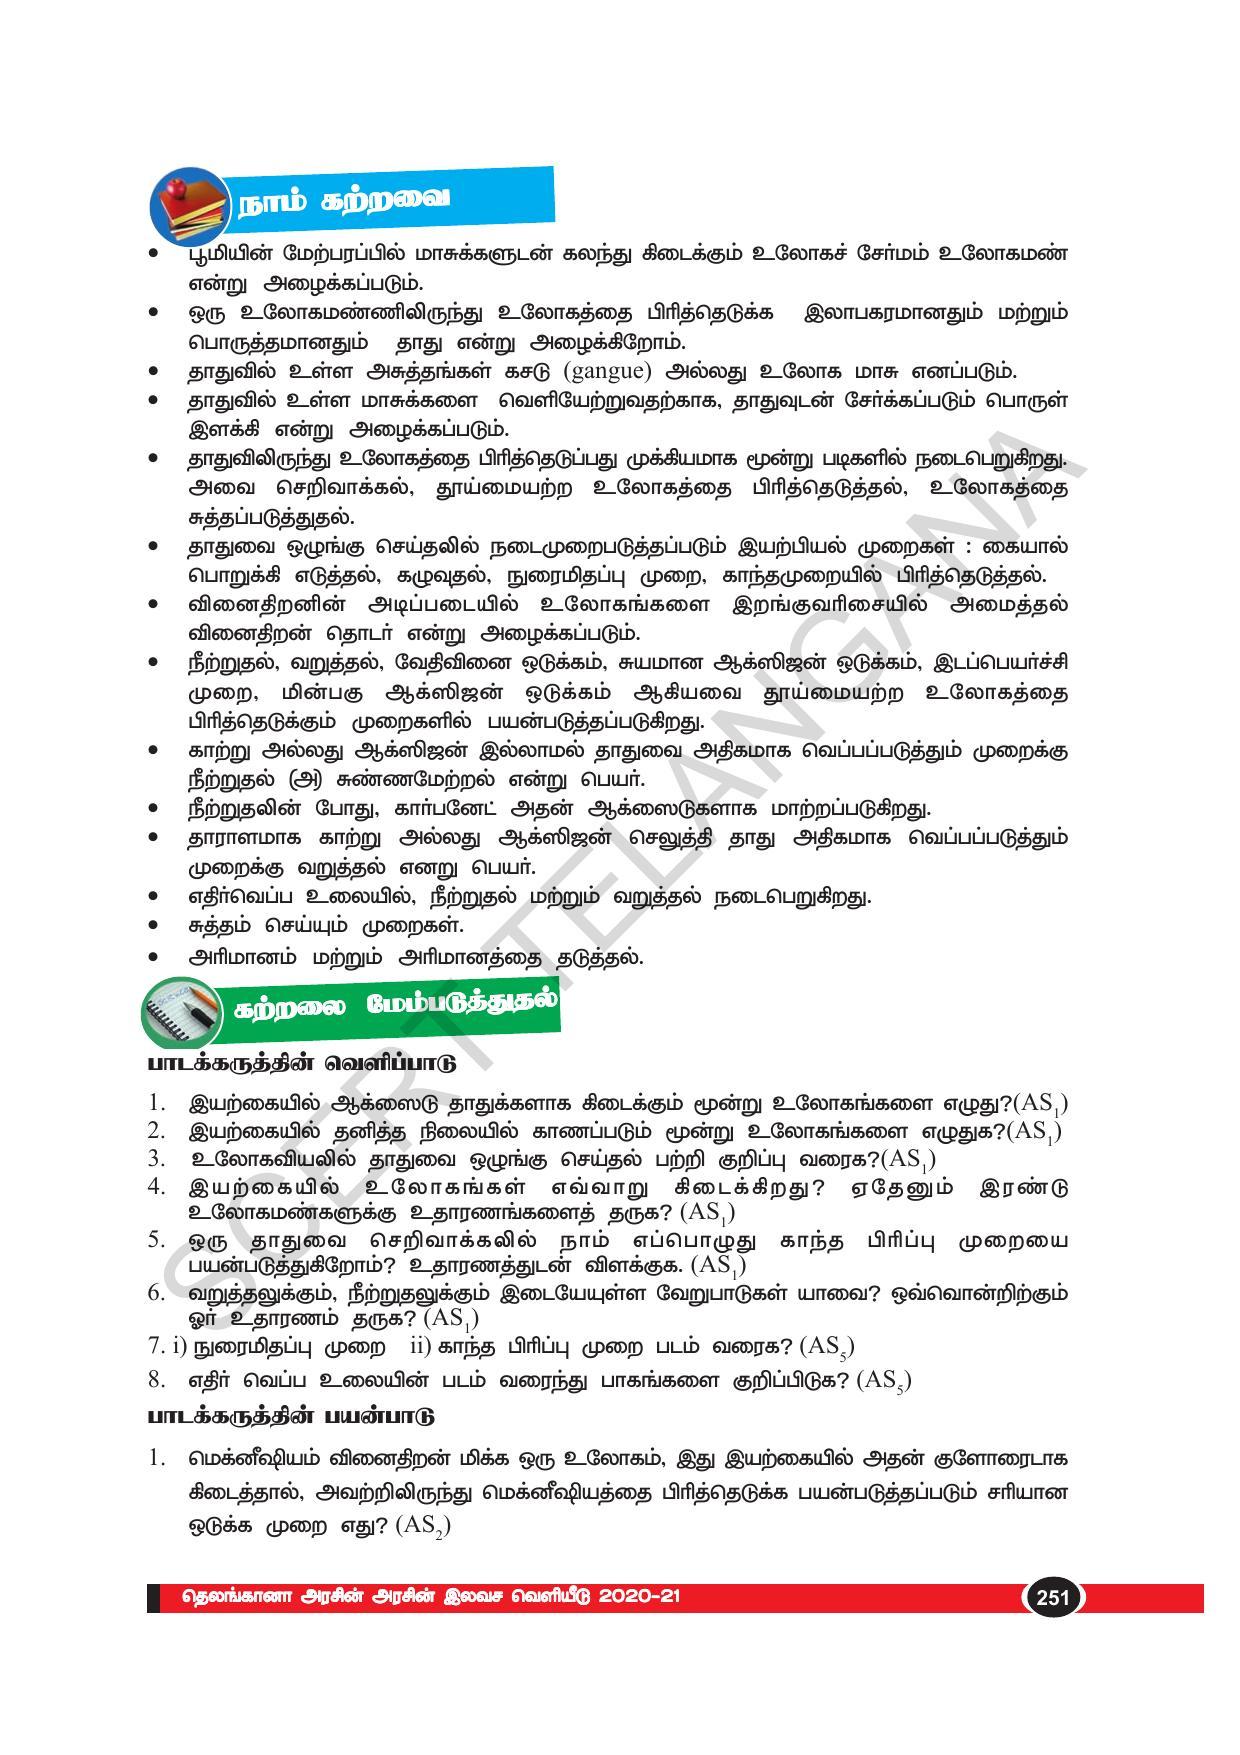 TS SCERT Class 10 Physical Science(Tamil Medium) Text Book - Page 263